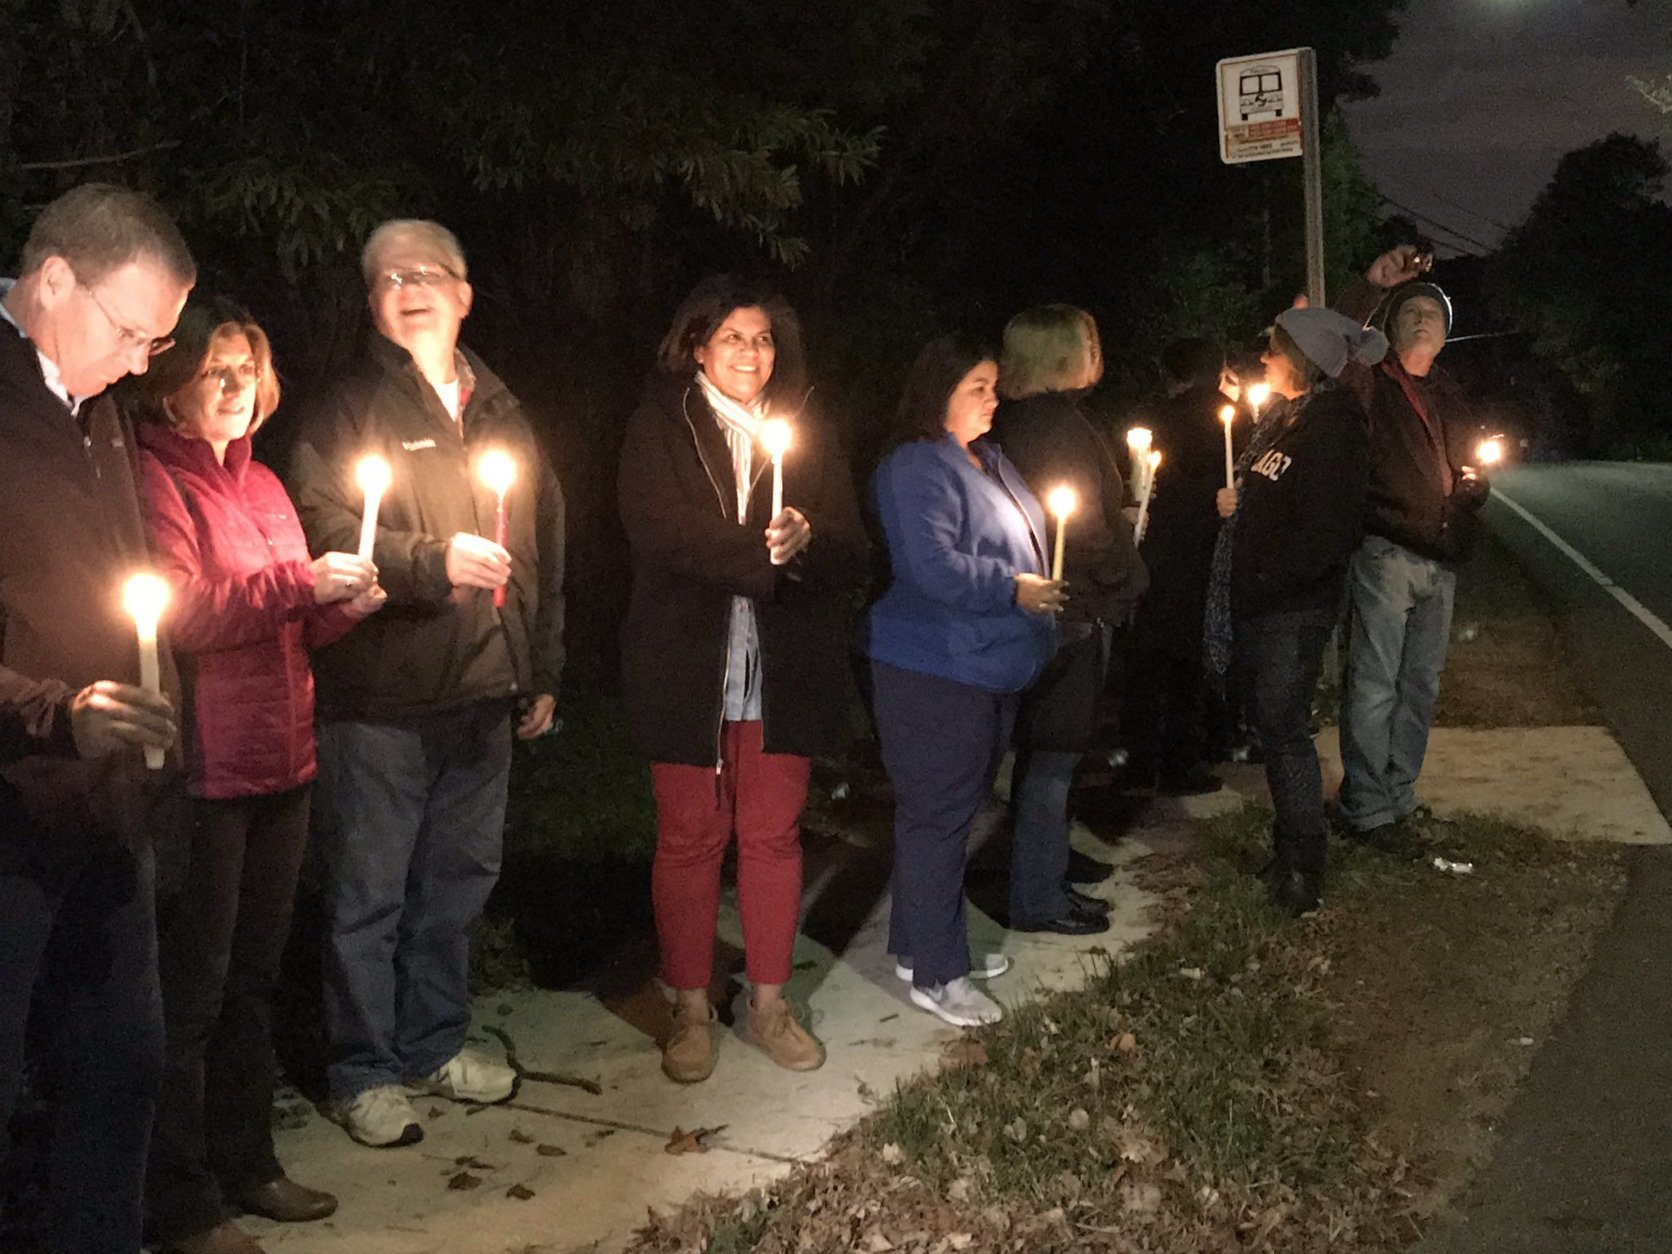 A vigil was held in honor of Bijan Ghaisar on Thursday, Nov. 8, 2018, nearly a year after he was fatally shot by U.S. Park Police. (WTOP/Michelle Basch)